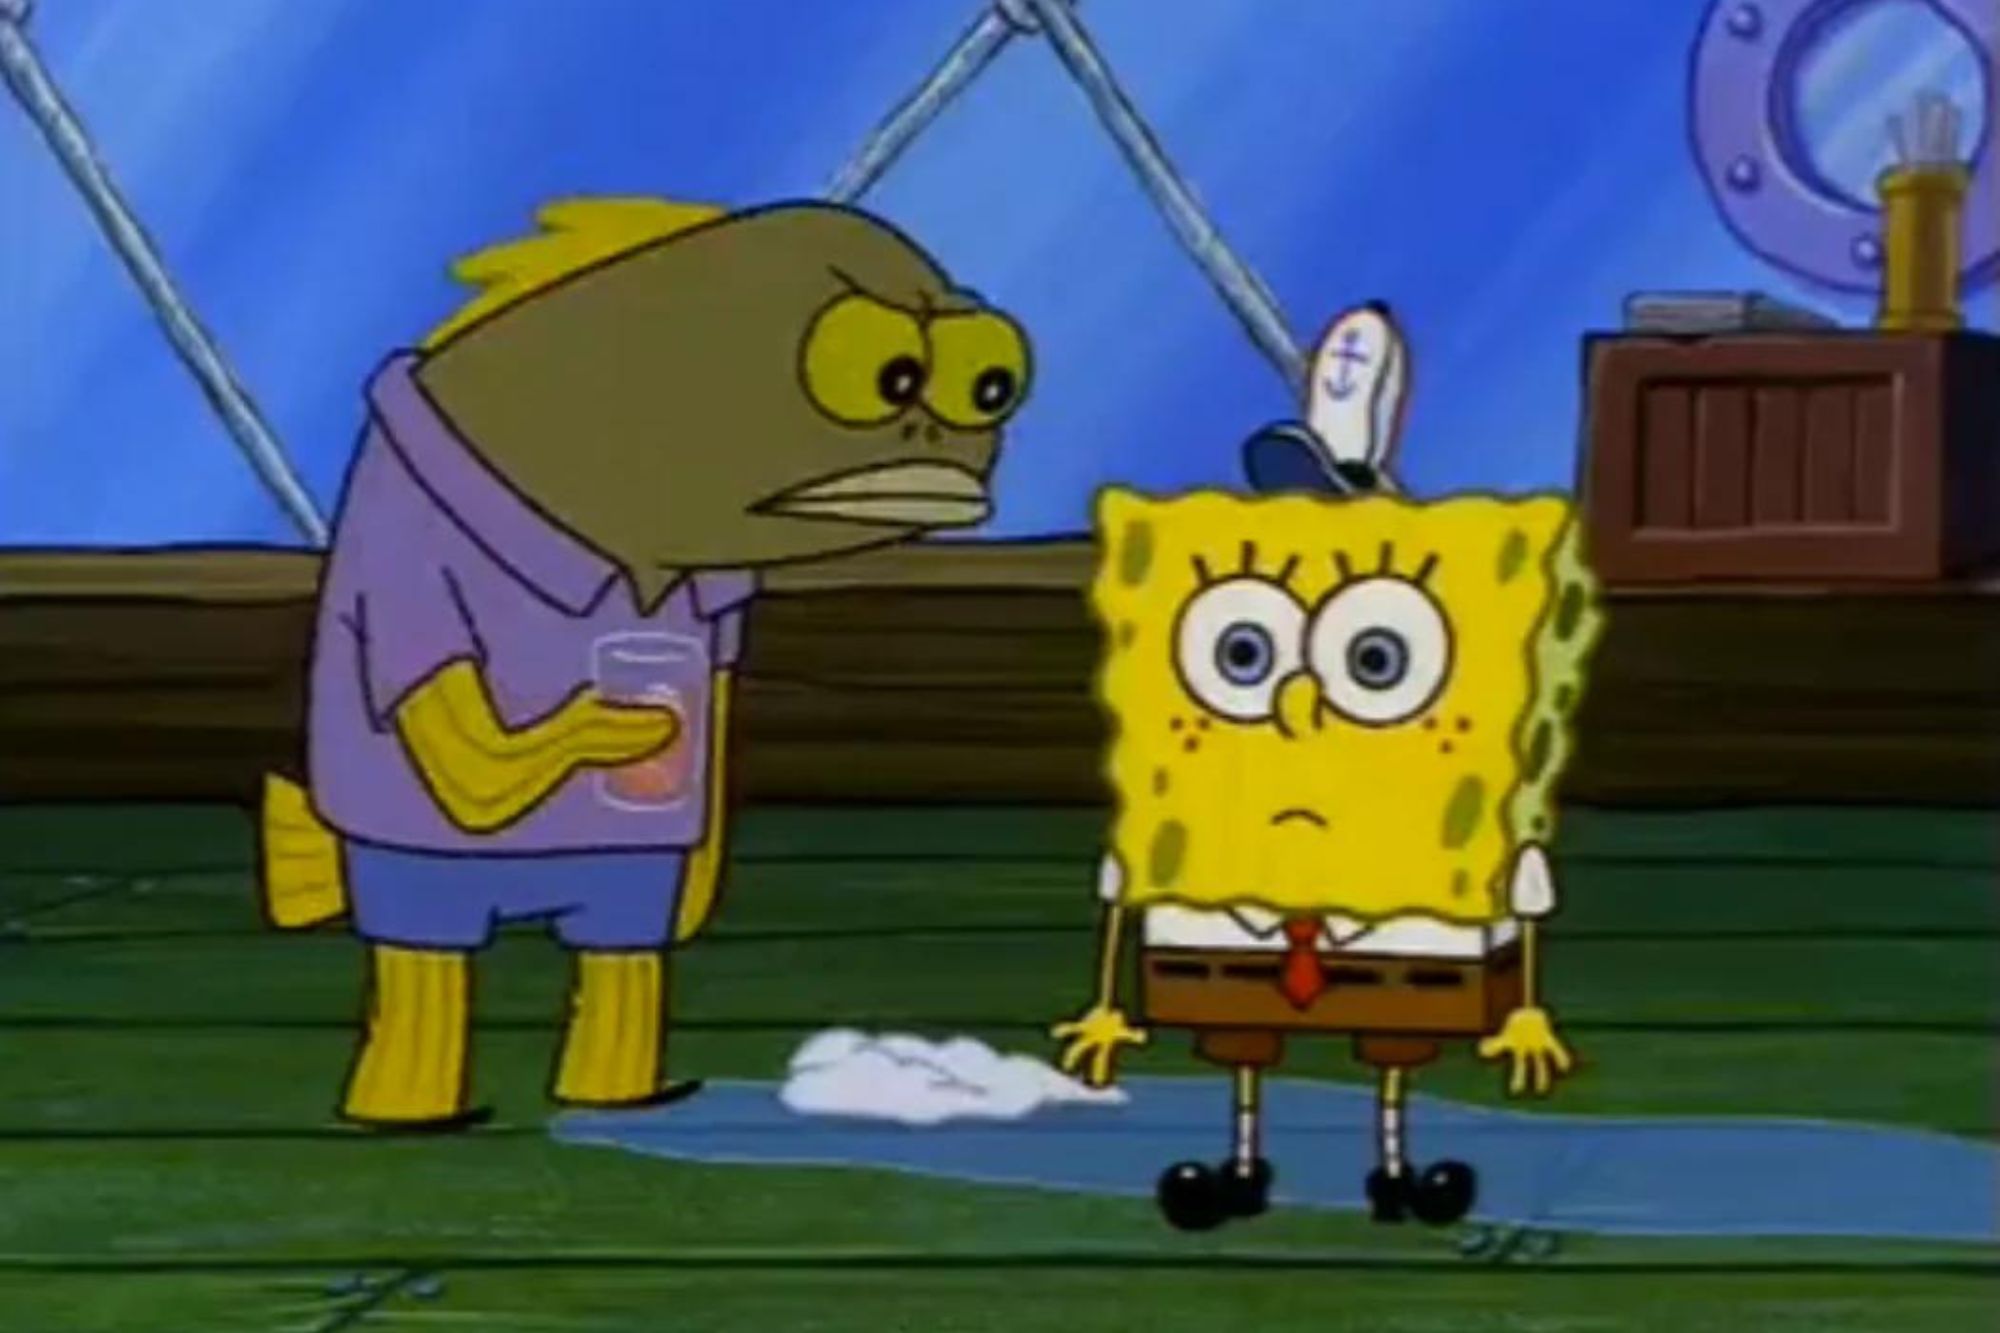 A fish looking at SpongeBob with an upset expression